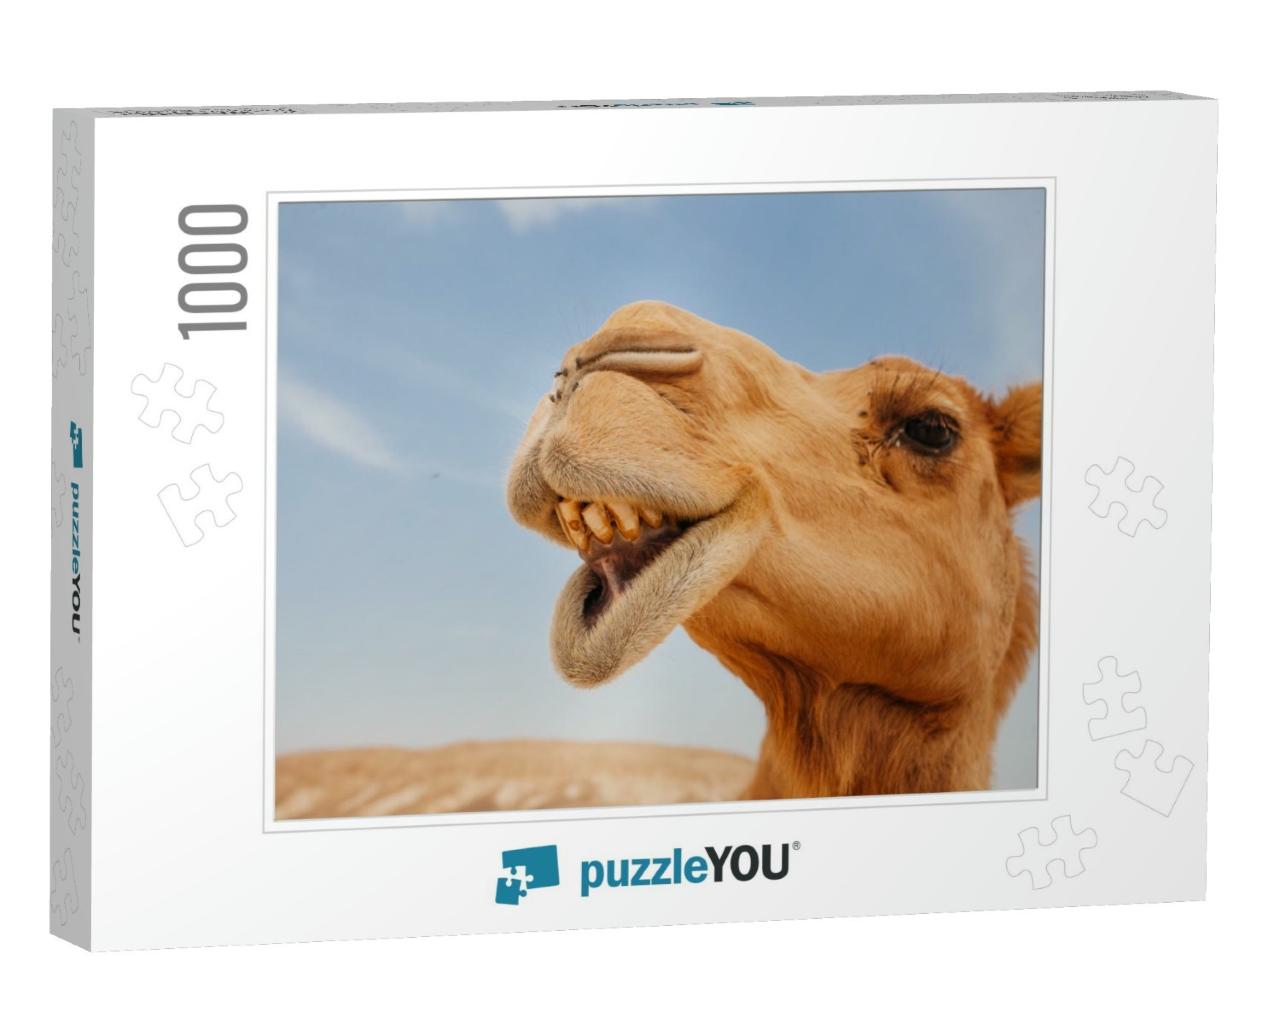 Camel in Israel Desert, Funny Close Up... Jigsaw Puzzle with 1000 pieces